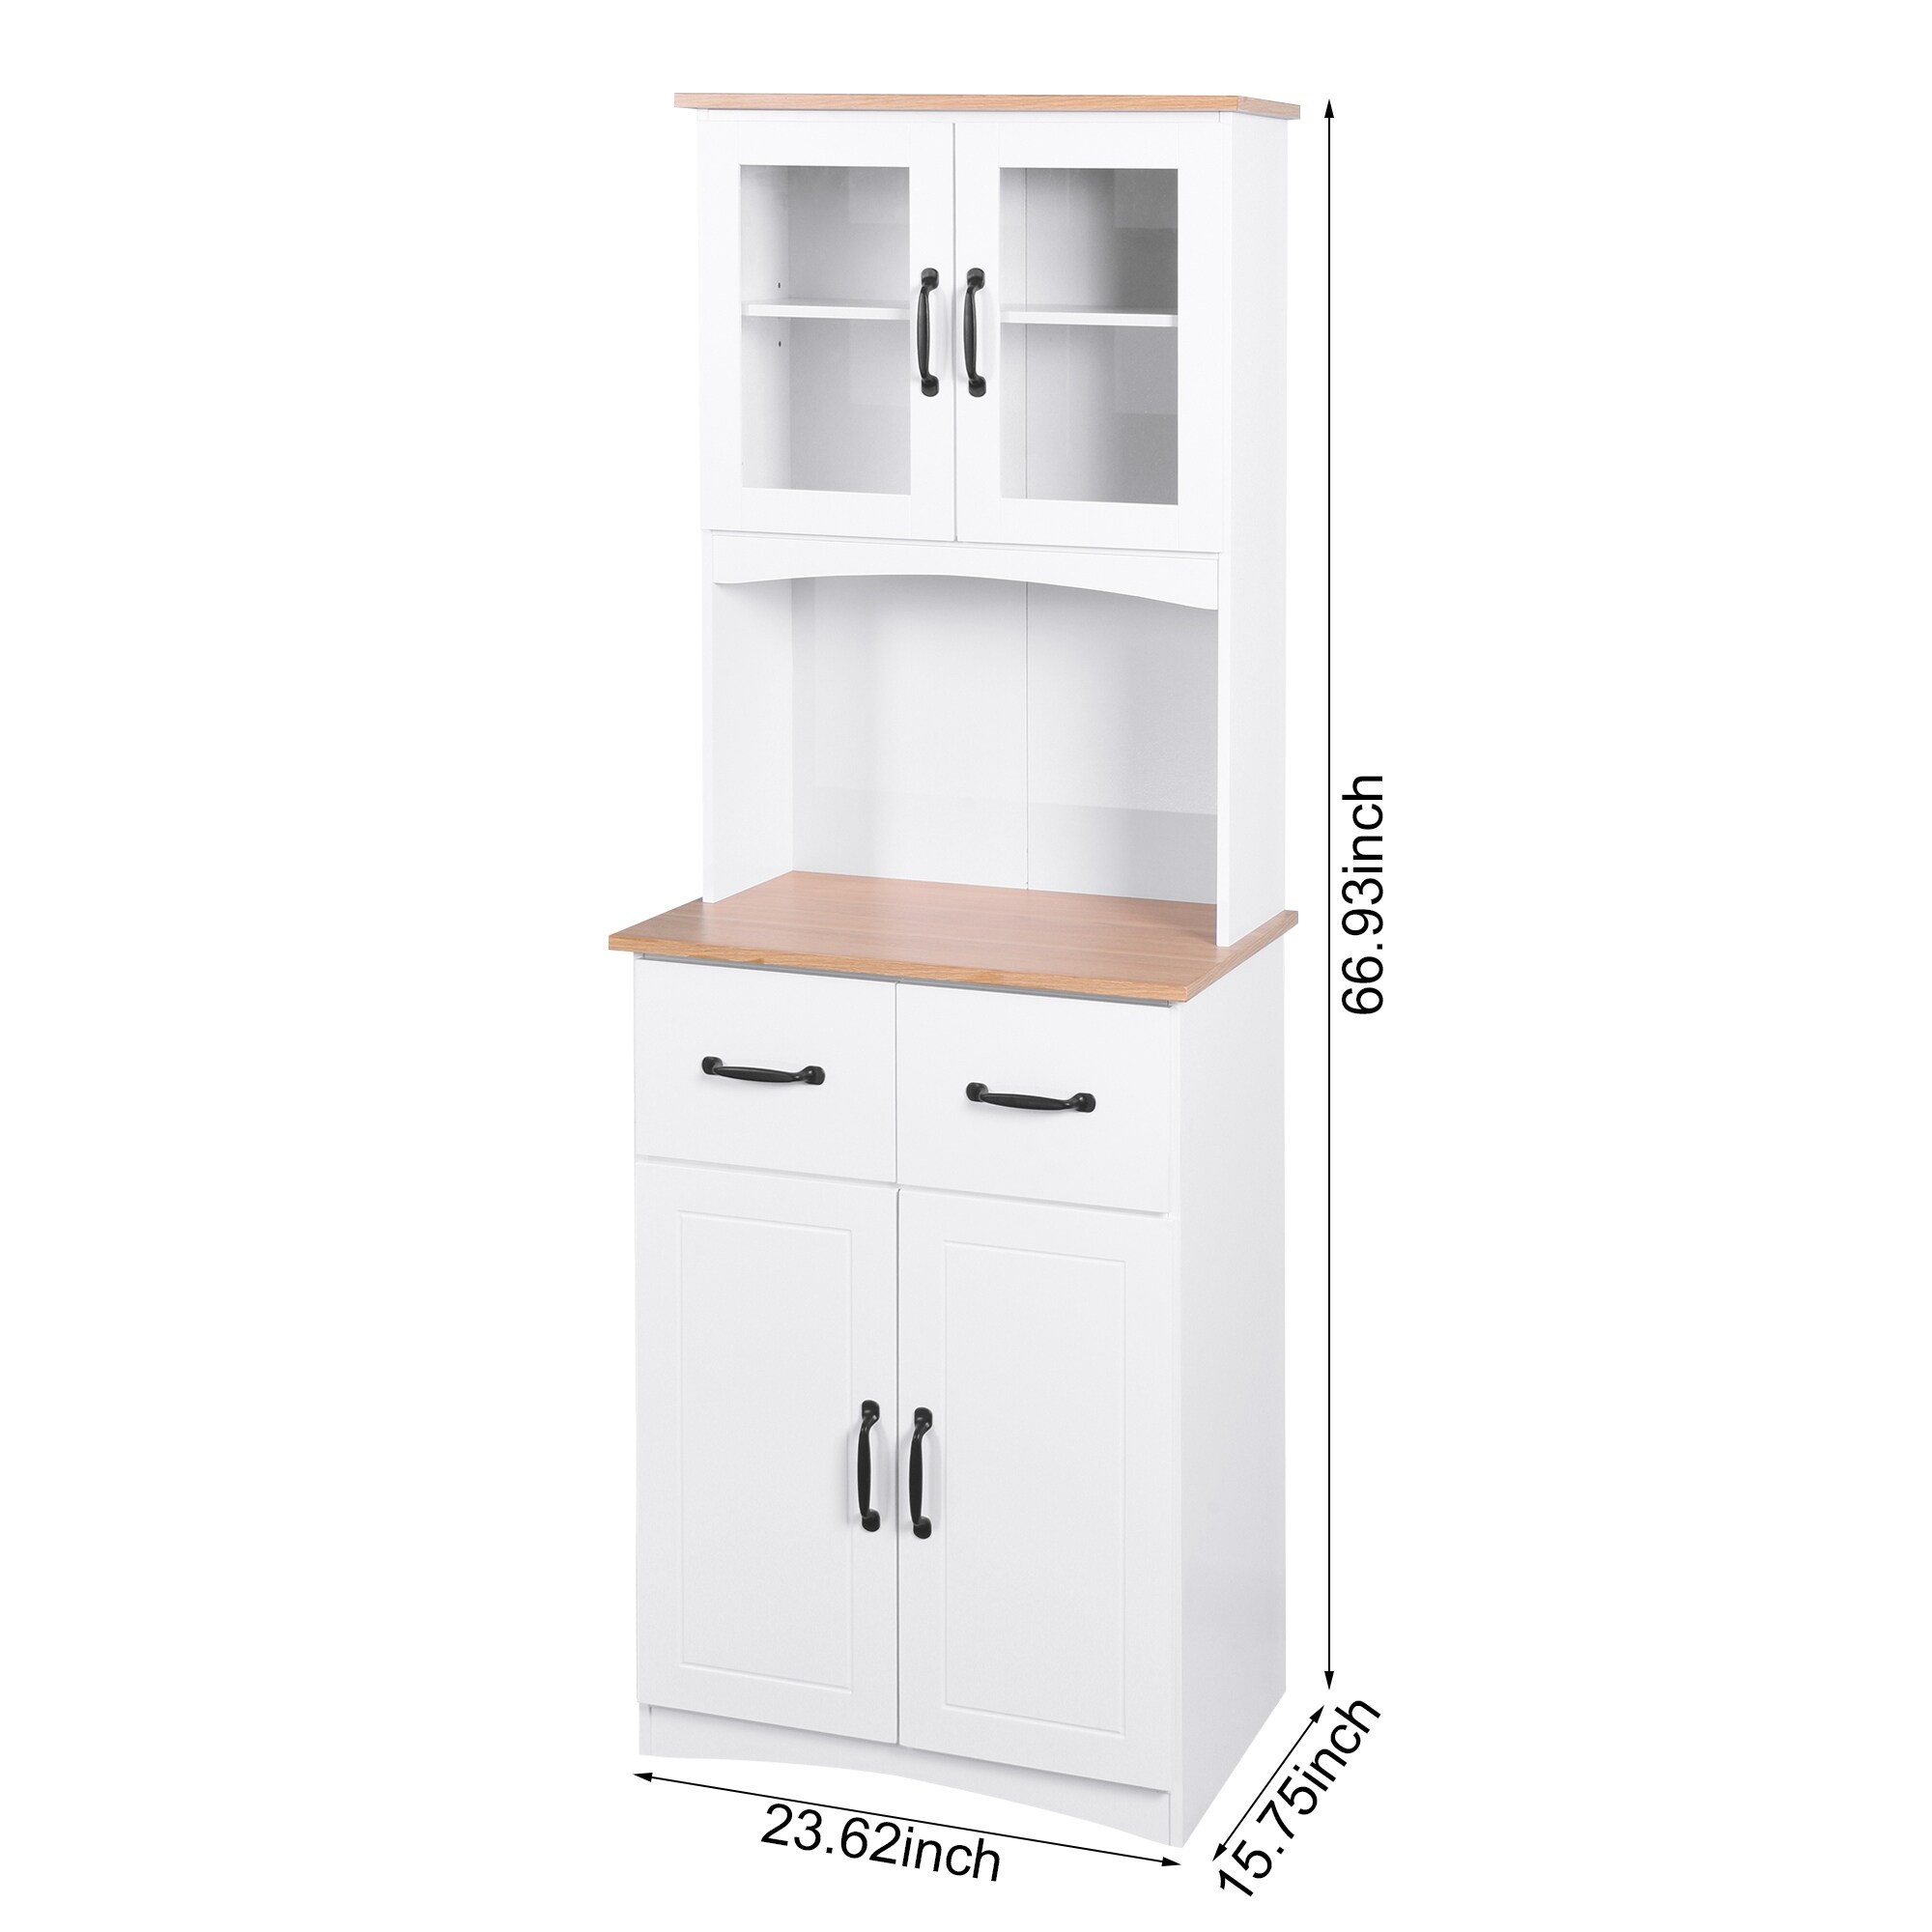 https://ak1.ostkcdn.com/images/products/is/images/direct/d8442882408fa2285f5d45947269d13bfaf5b1d9/Kitchen-Cabinet-White-Pantry-Room-Storage-Microwave-Cabinet-with-Framed-Glass-Doors-and-Drawer.jpg